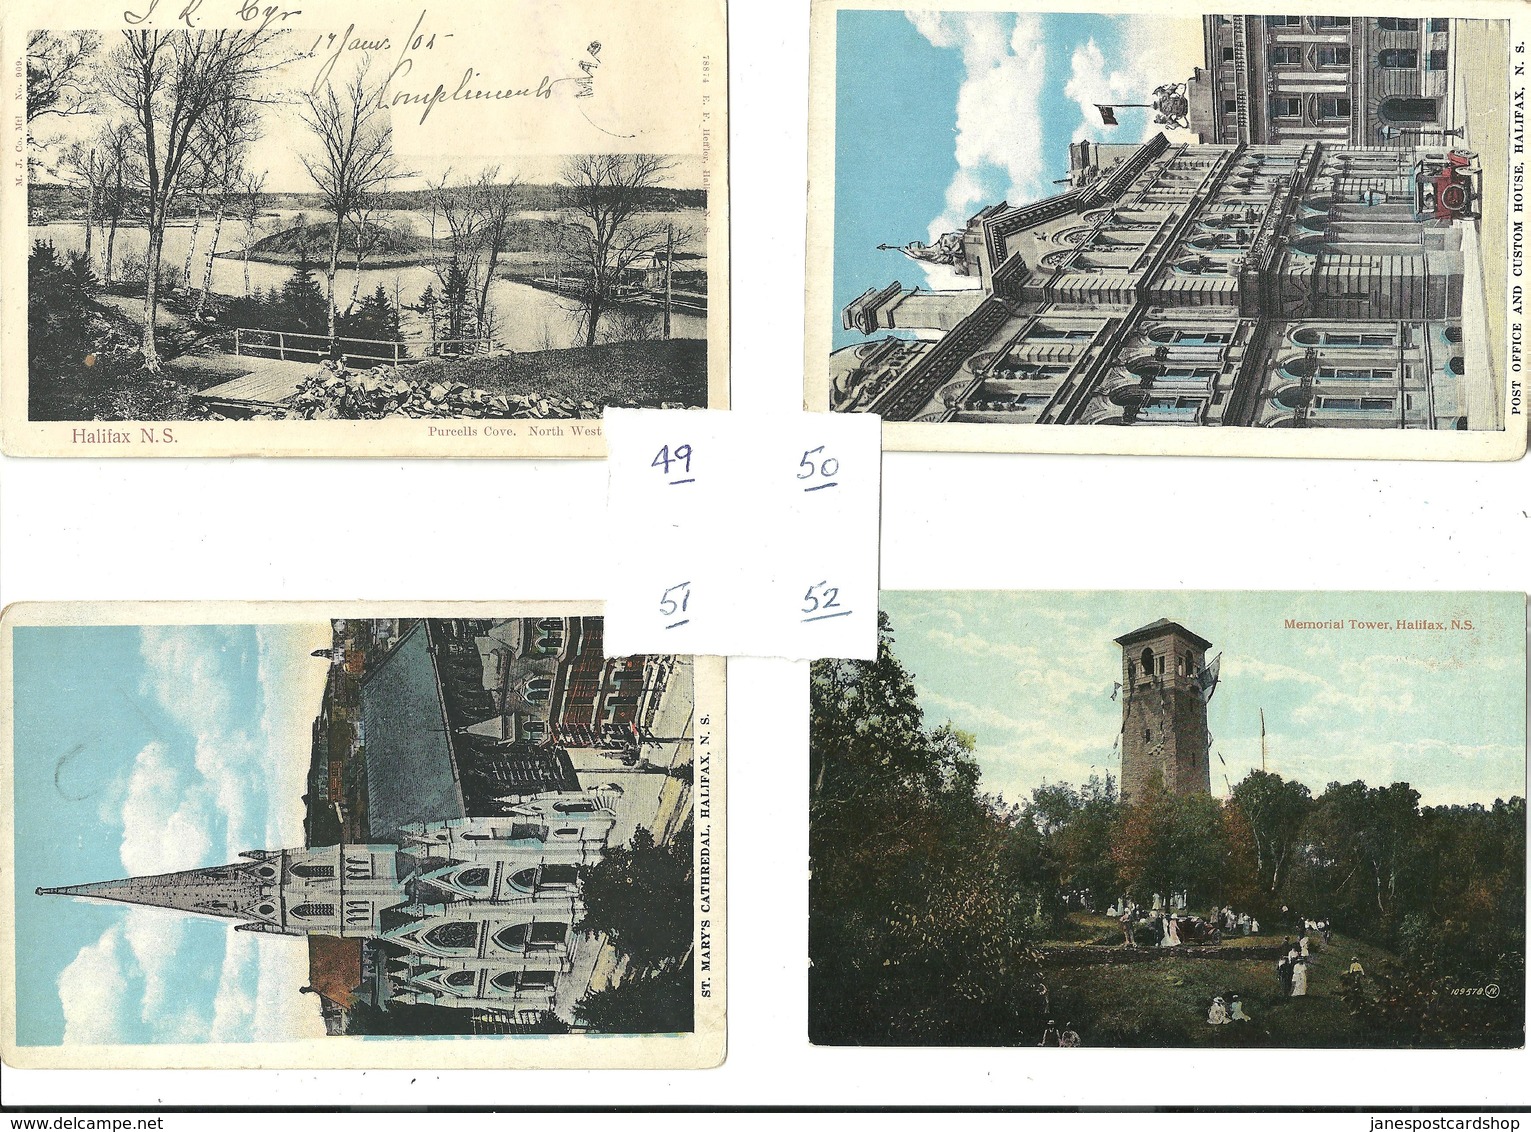 4 POSTCARDS, Purcells Cove, North West Arm, Post Office, St. Mary's Cathedral, Memorial Tower, Halifax, NOVA SCOTIA - Halifax